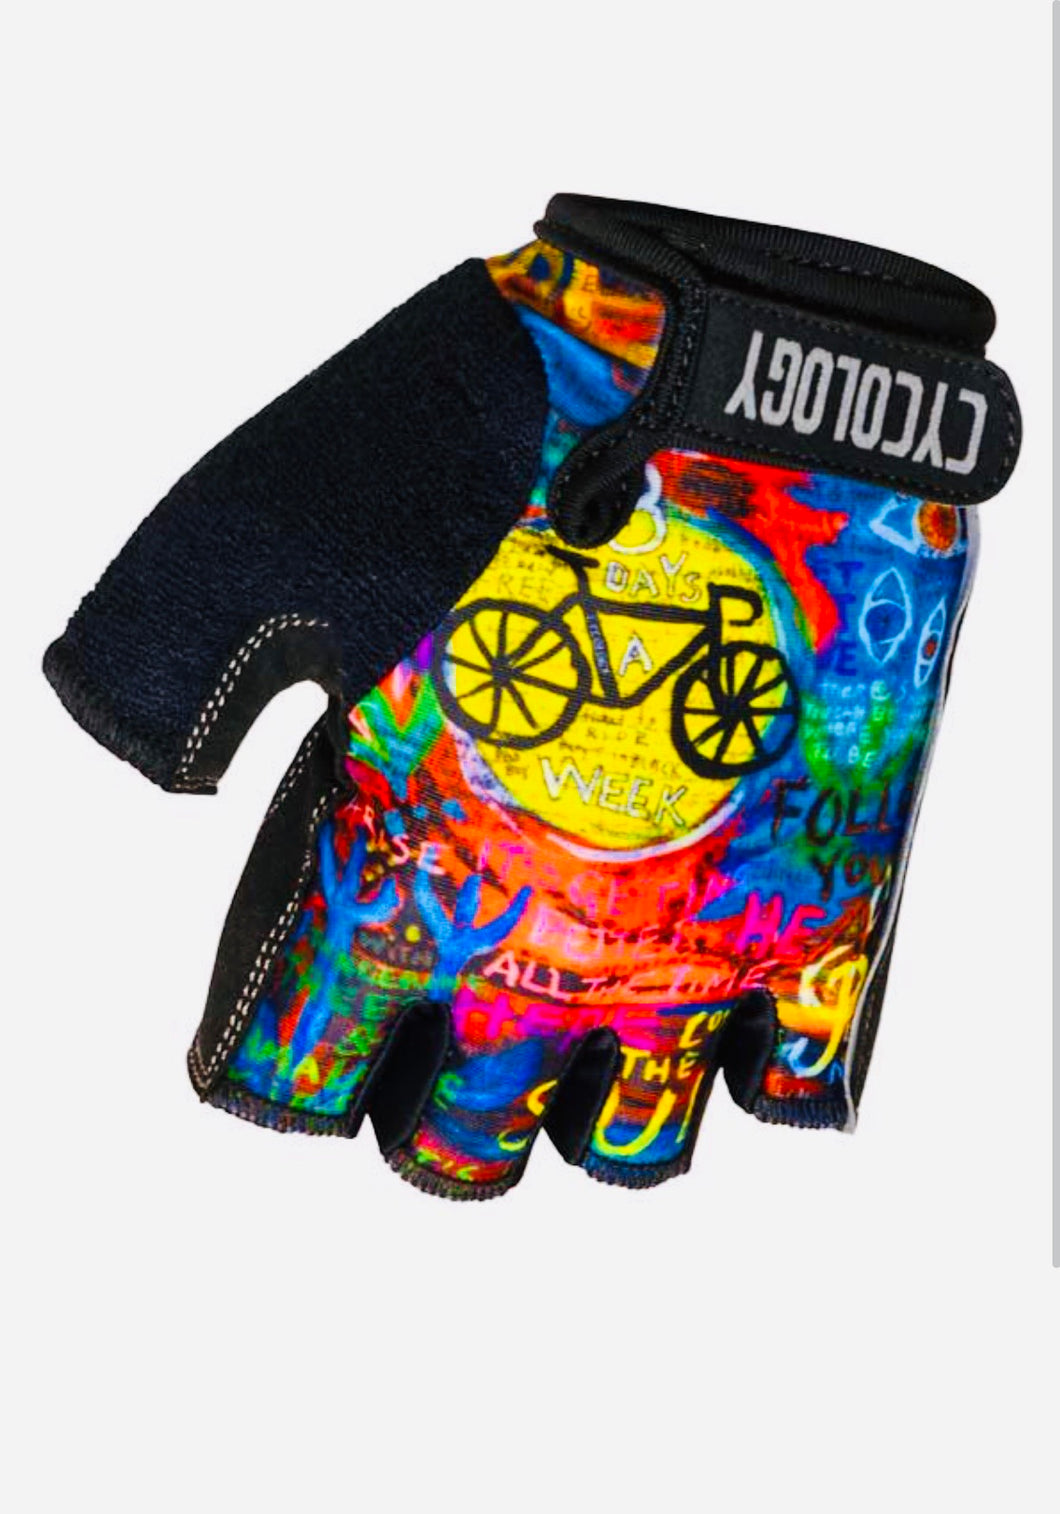 Cycology Quality Unisex Short-Fingered Cycling Gloves - Design Eight Days a Week